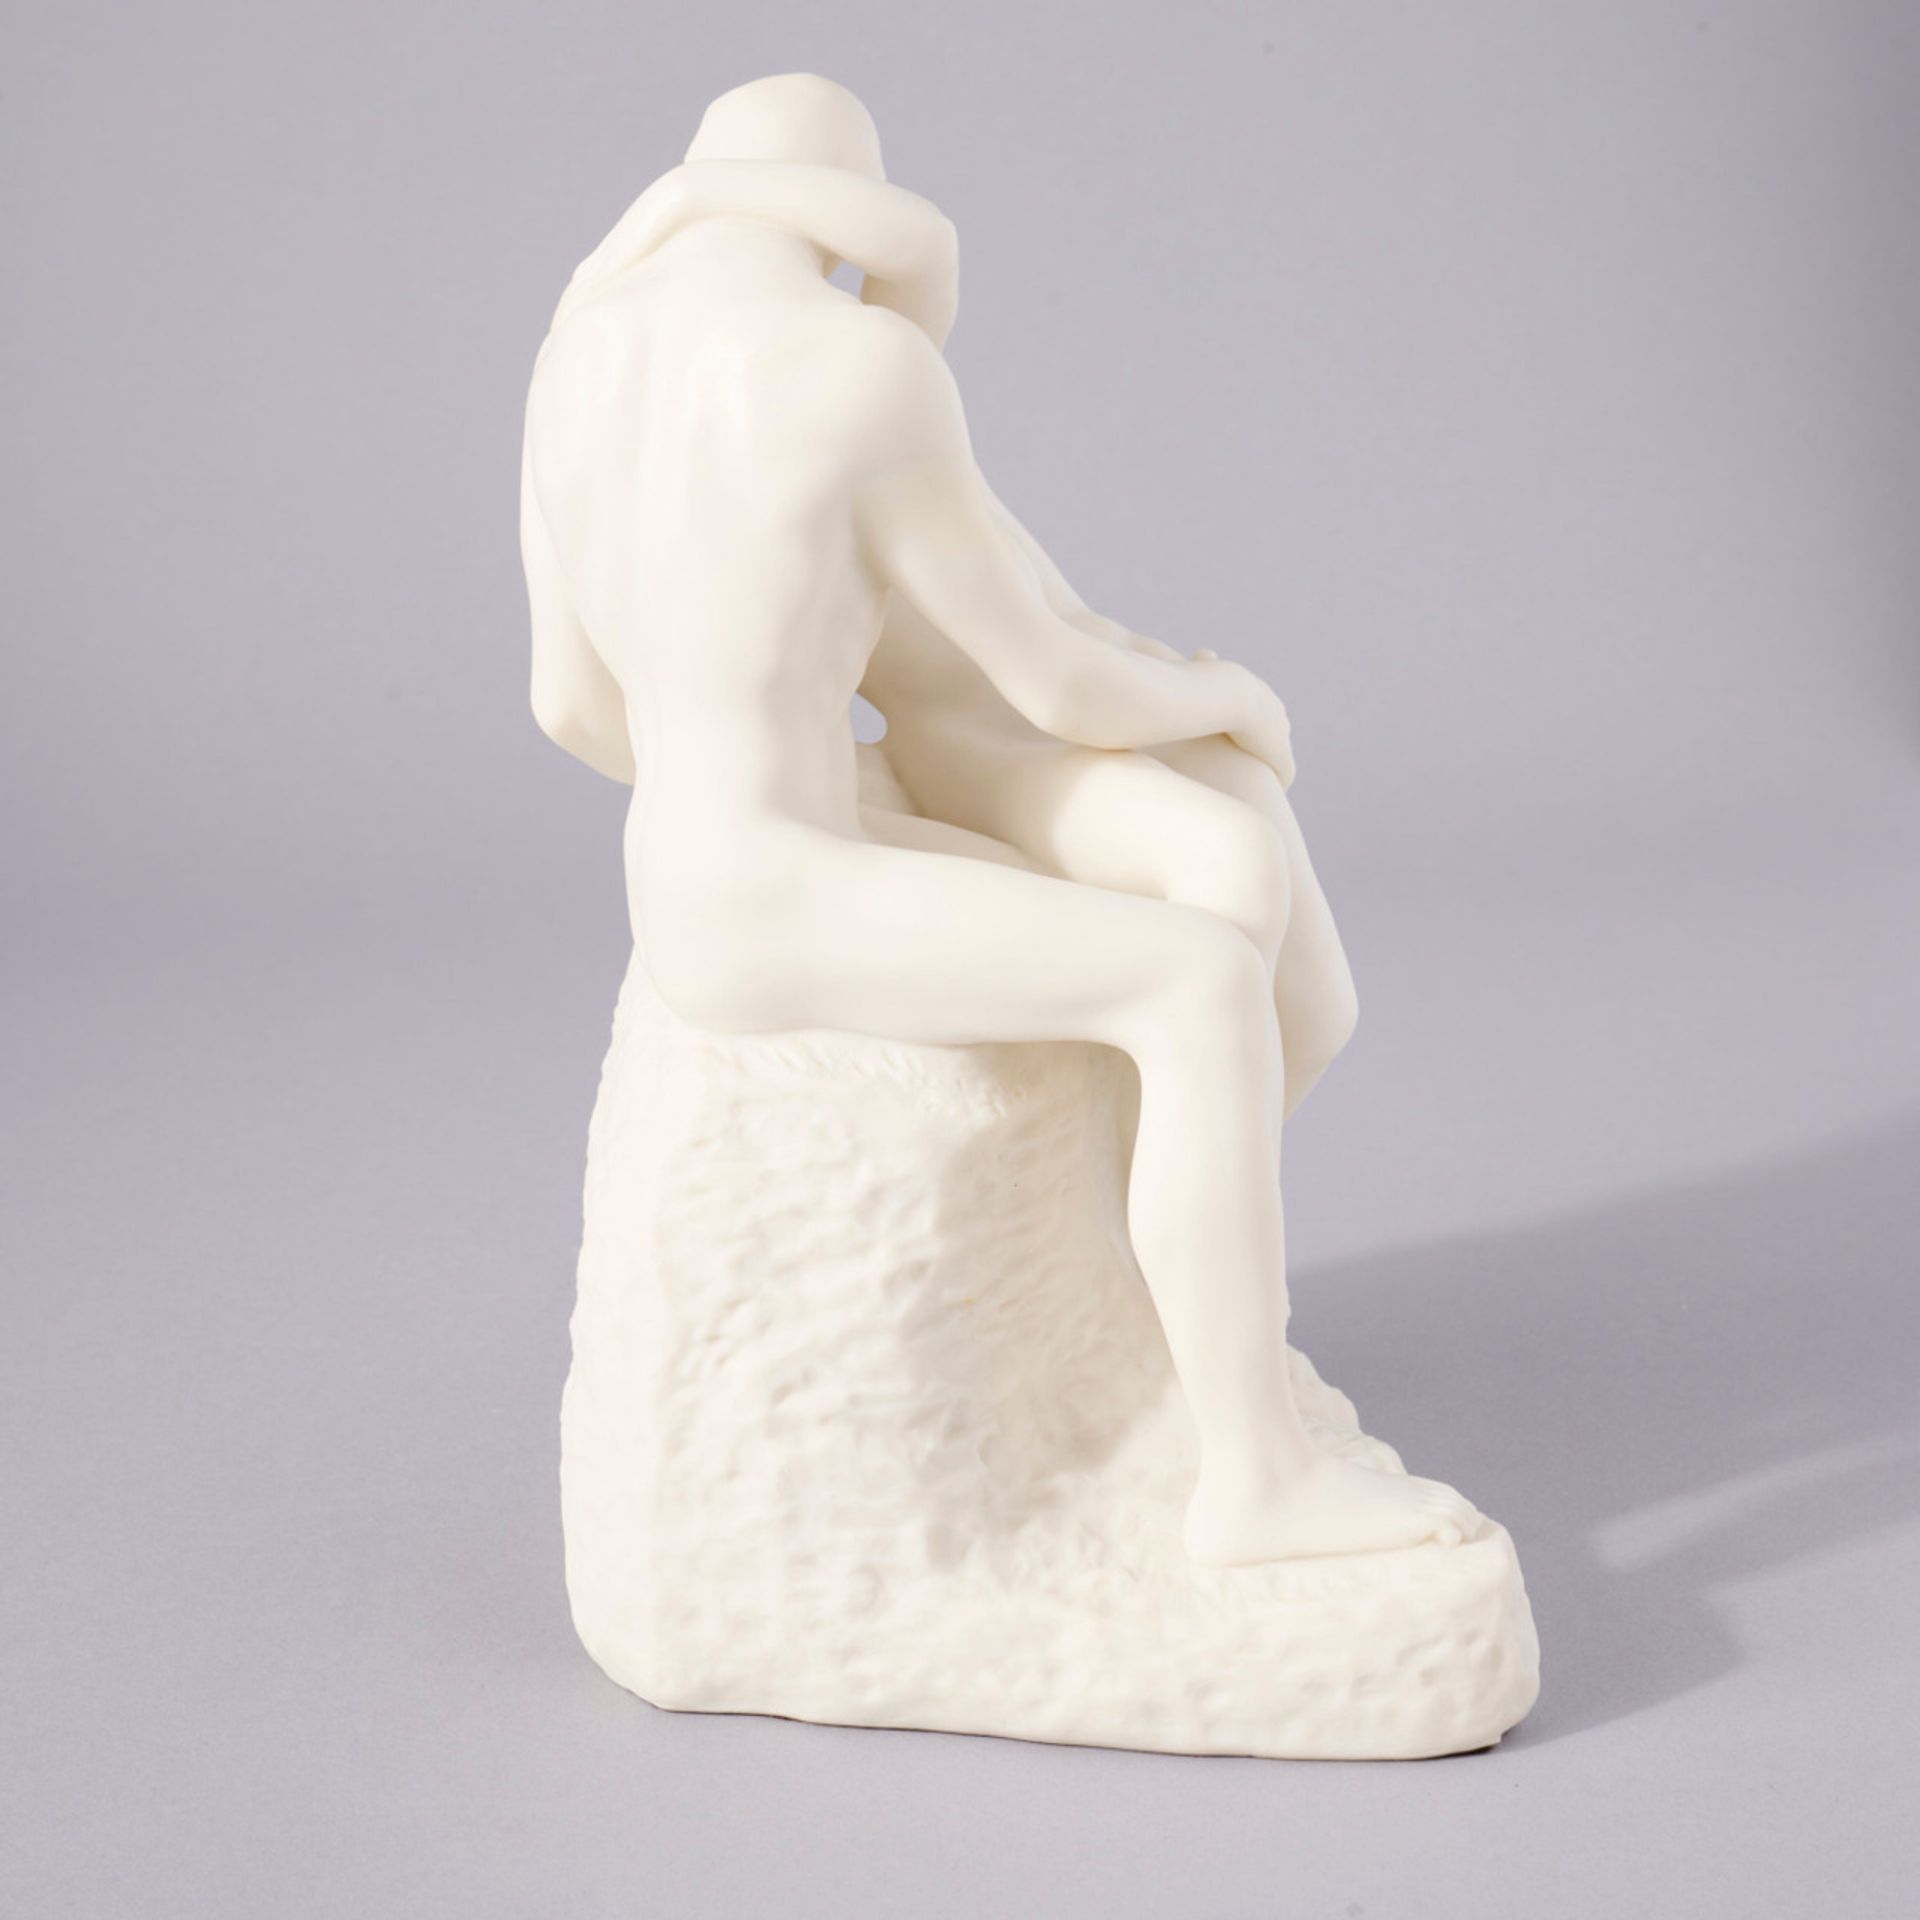 Auguste Rodin "The Kiss" Sculpture - Image 4 of 4